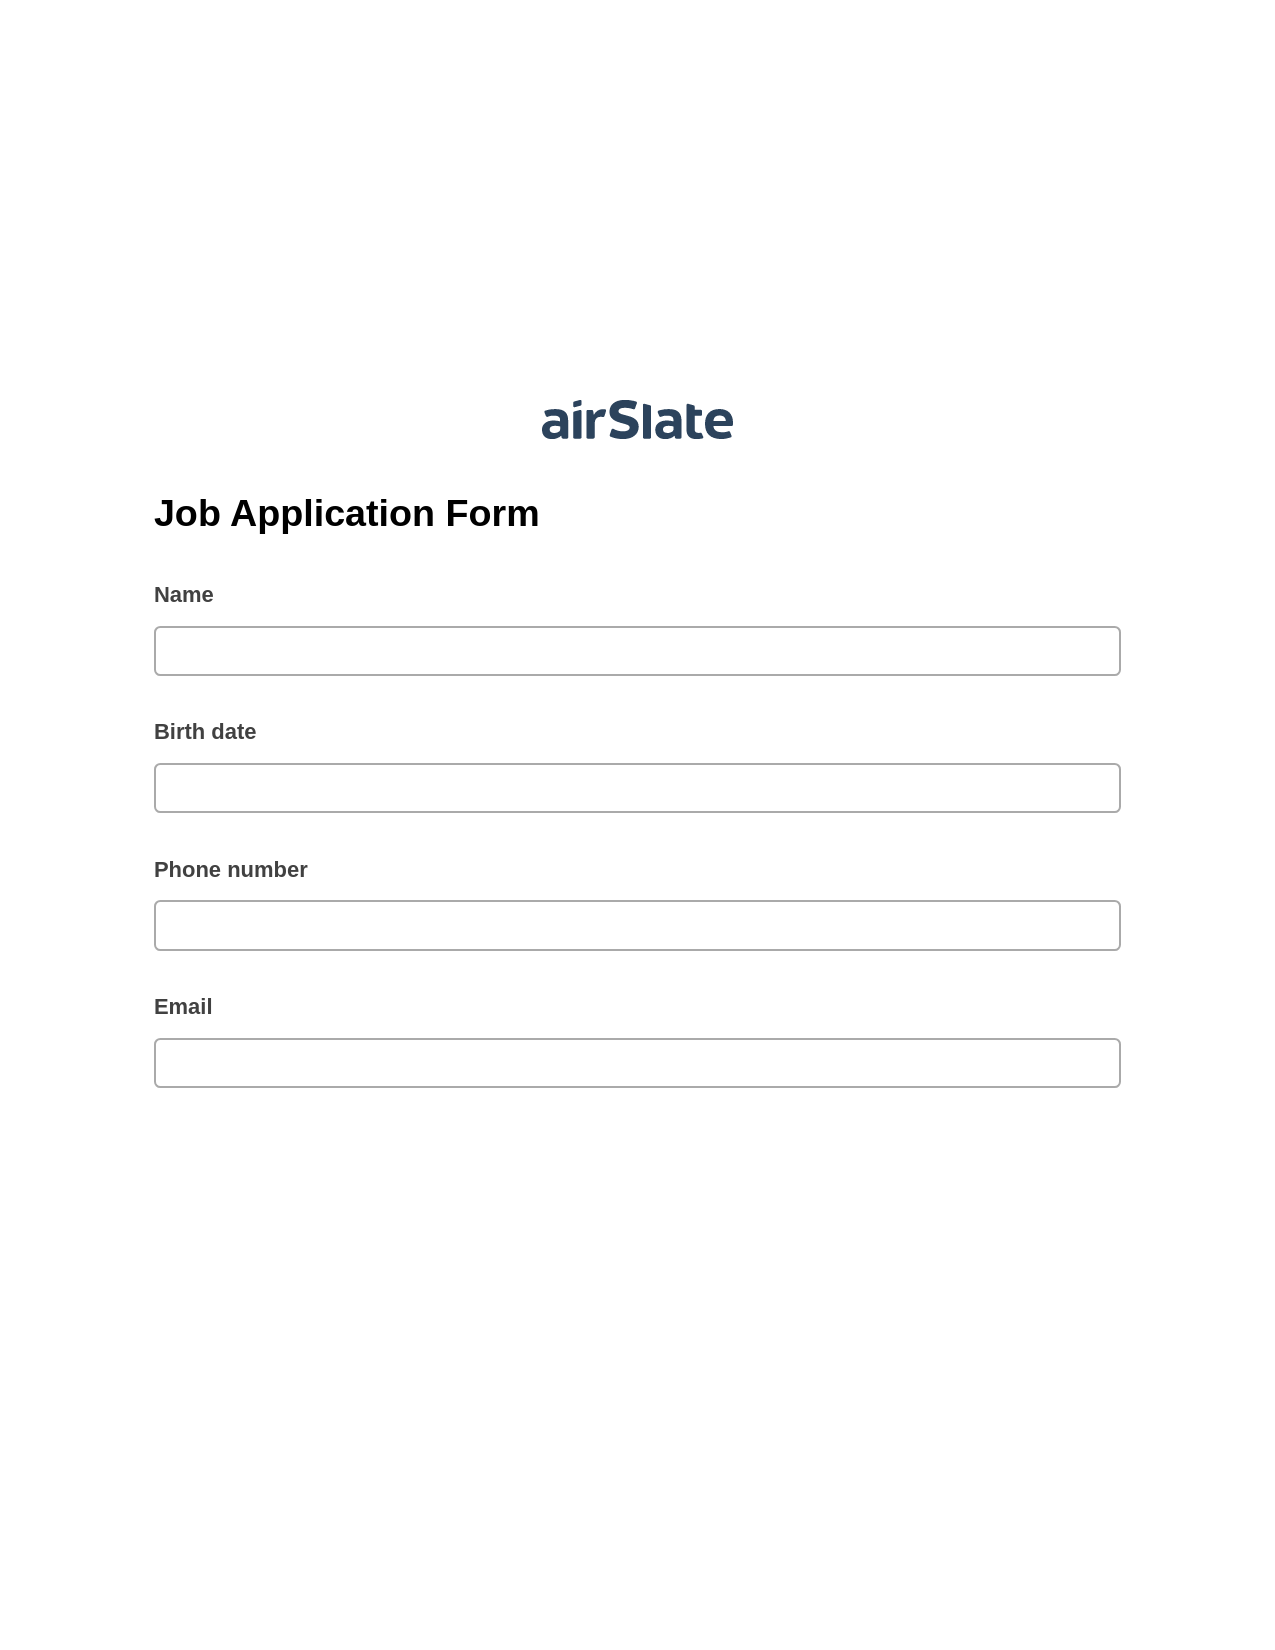 Multirole Job Application Form Pre-fill from Google Sheets Bot, Send a Slate to Salesforce Contact Bot, Box Bot